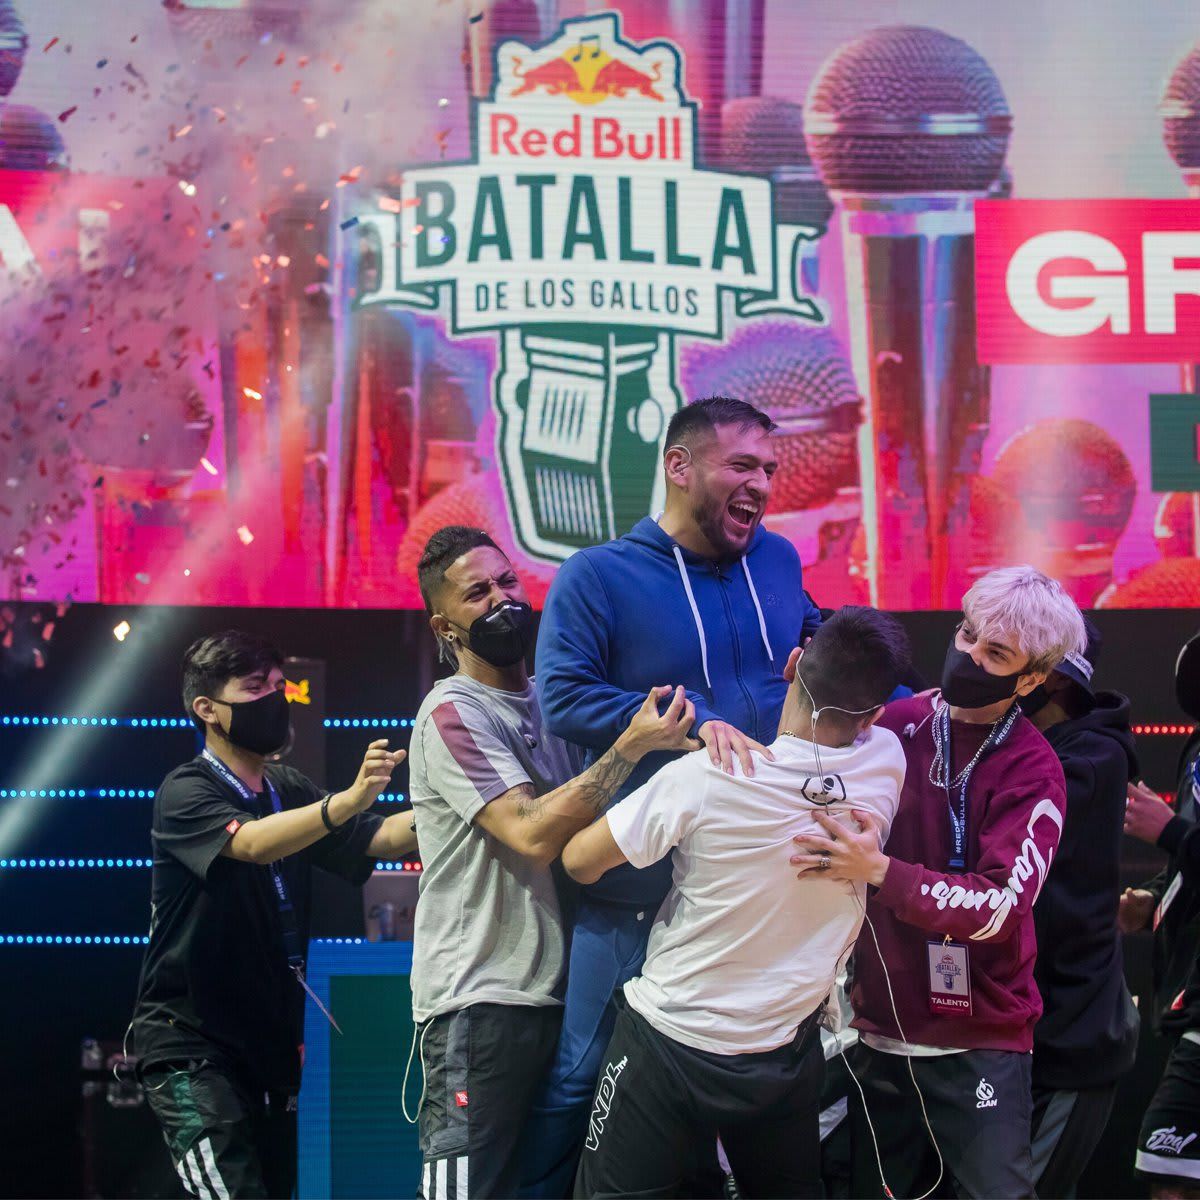 Stick celebrates after winning the Red Bull Batalla de los Gallos National Finals in Lima, Peru on November 7, 2020.